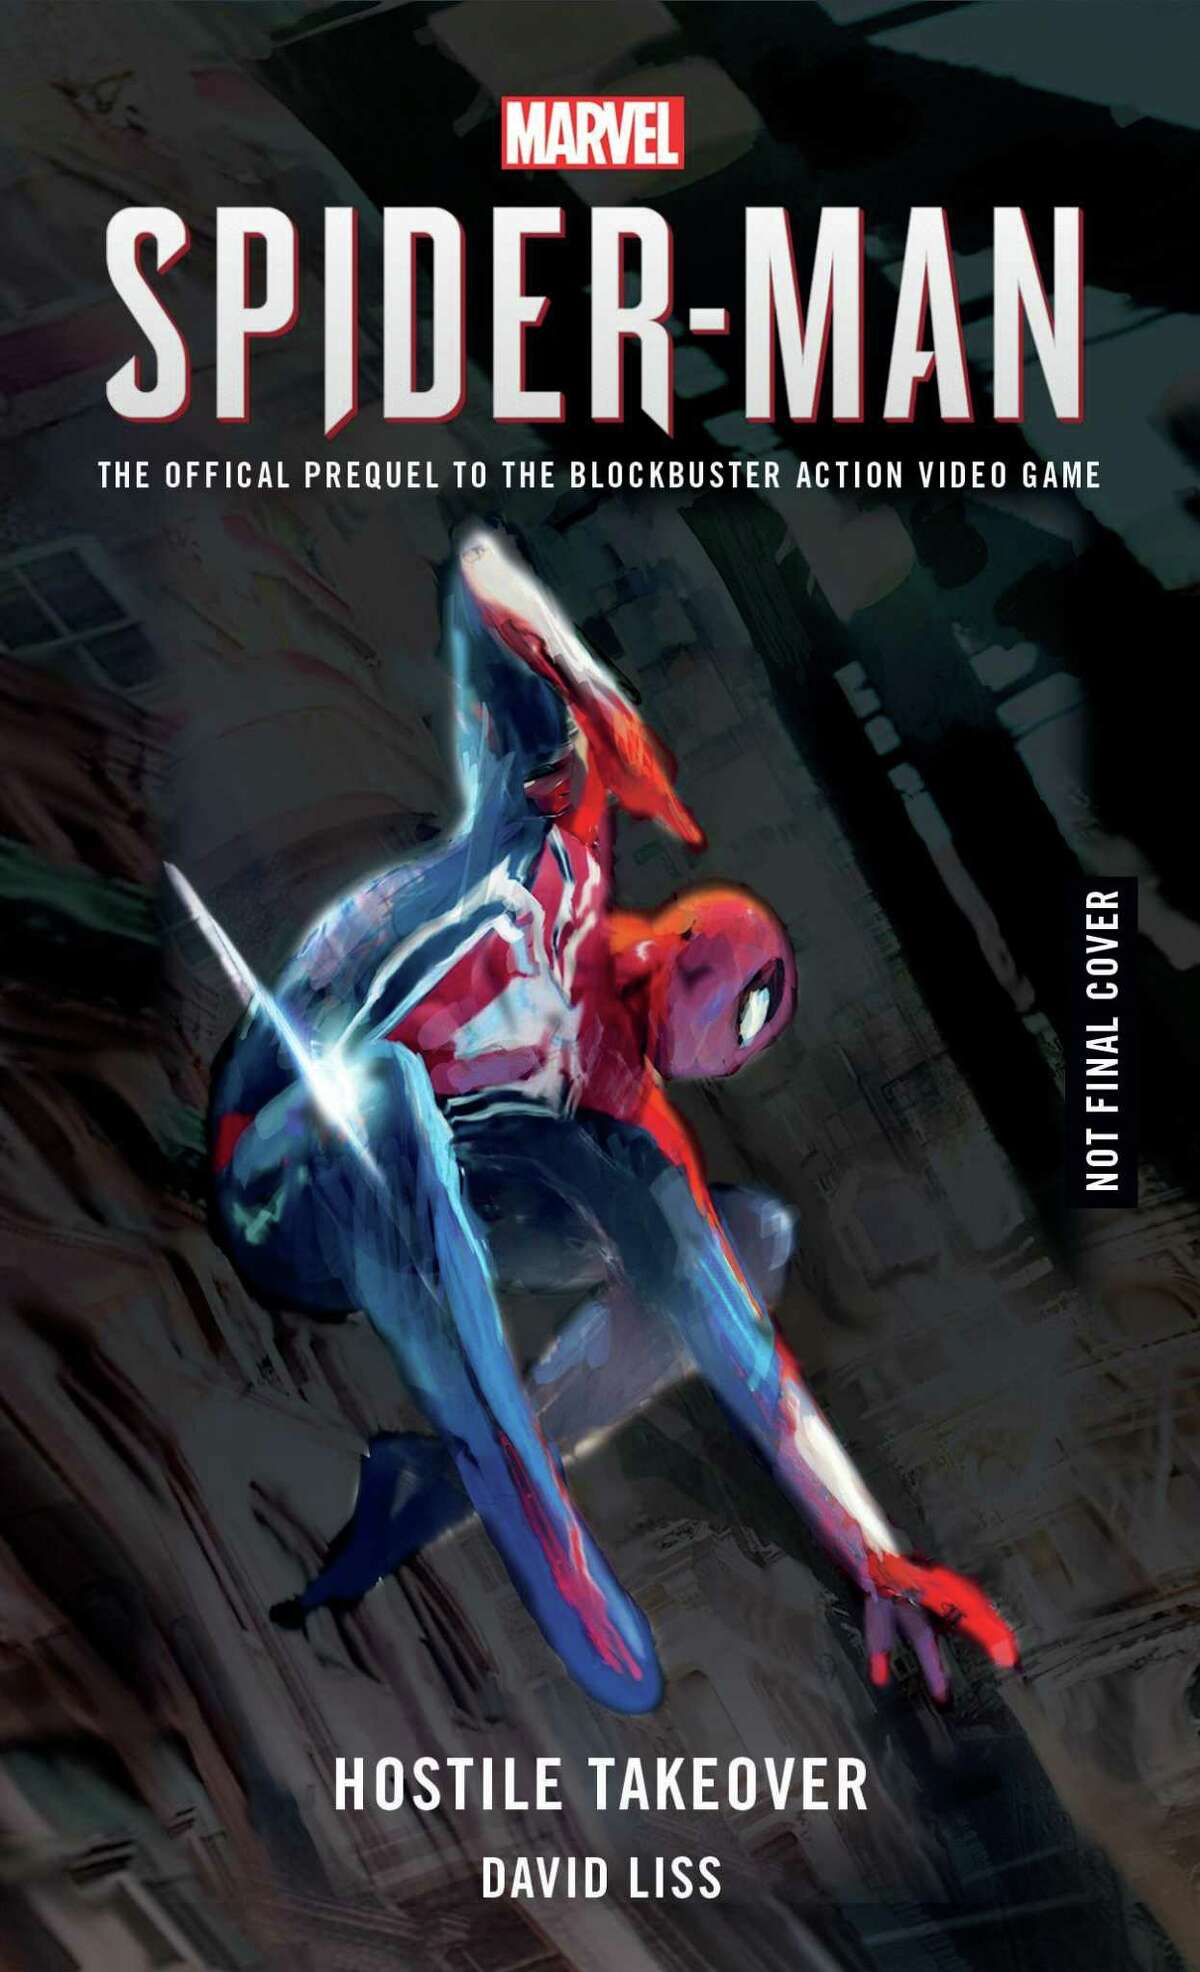 "Marvel's Spider-Man: Hostile Takeover" by San Antonio novelist David Liss is the official prequel novel for the upcoming video game, "Marvel's Spider-Man." "Hostile Takeover" hits Aug. 21, 2018, ahead of the video game's Sept. 7 release for PlayStation 4.